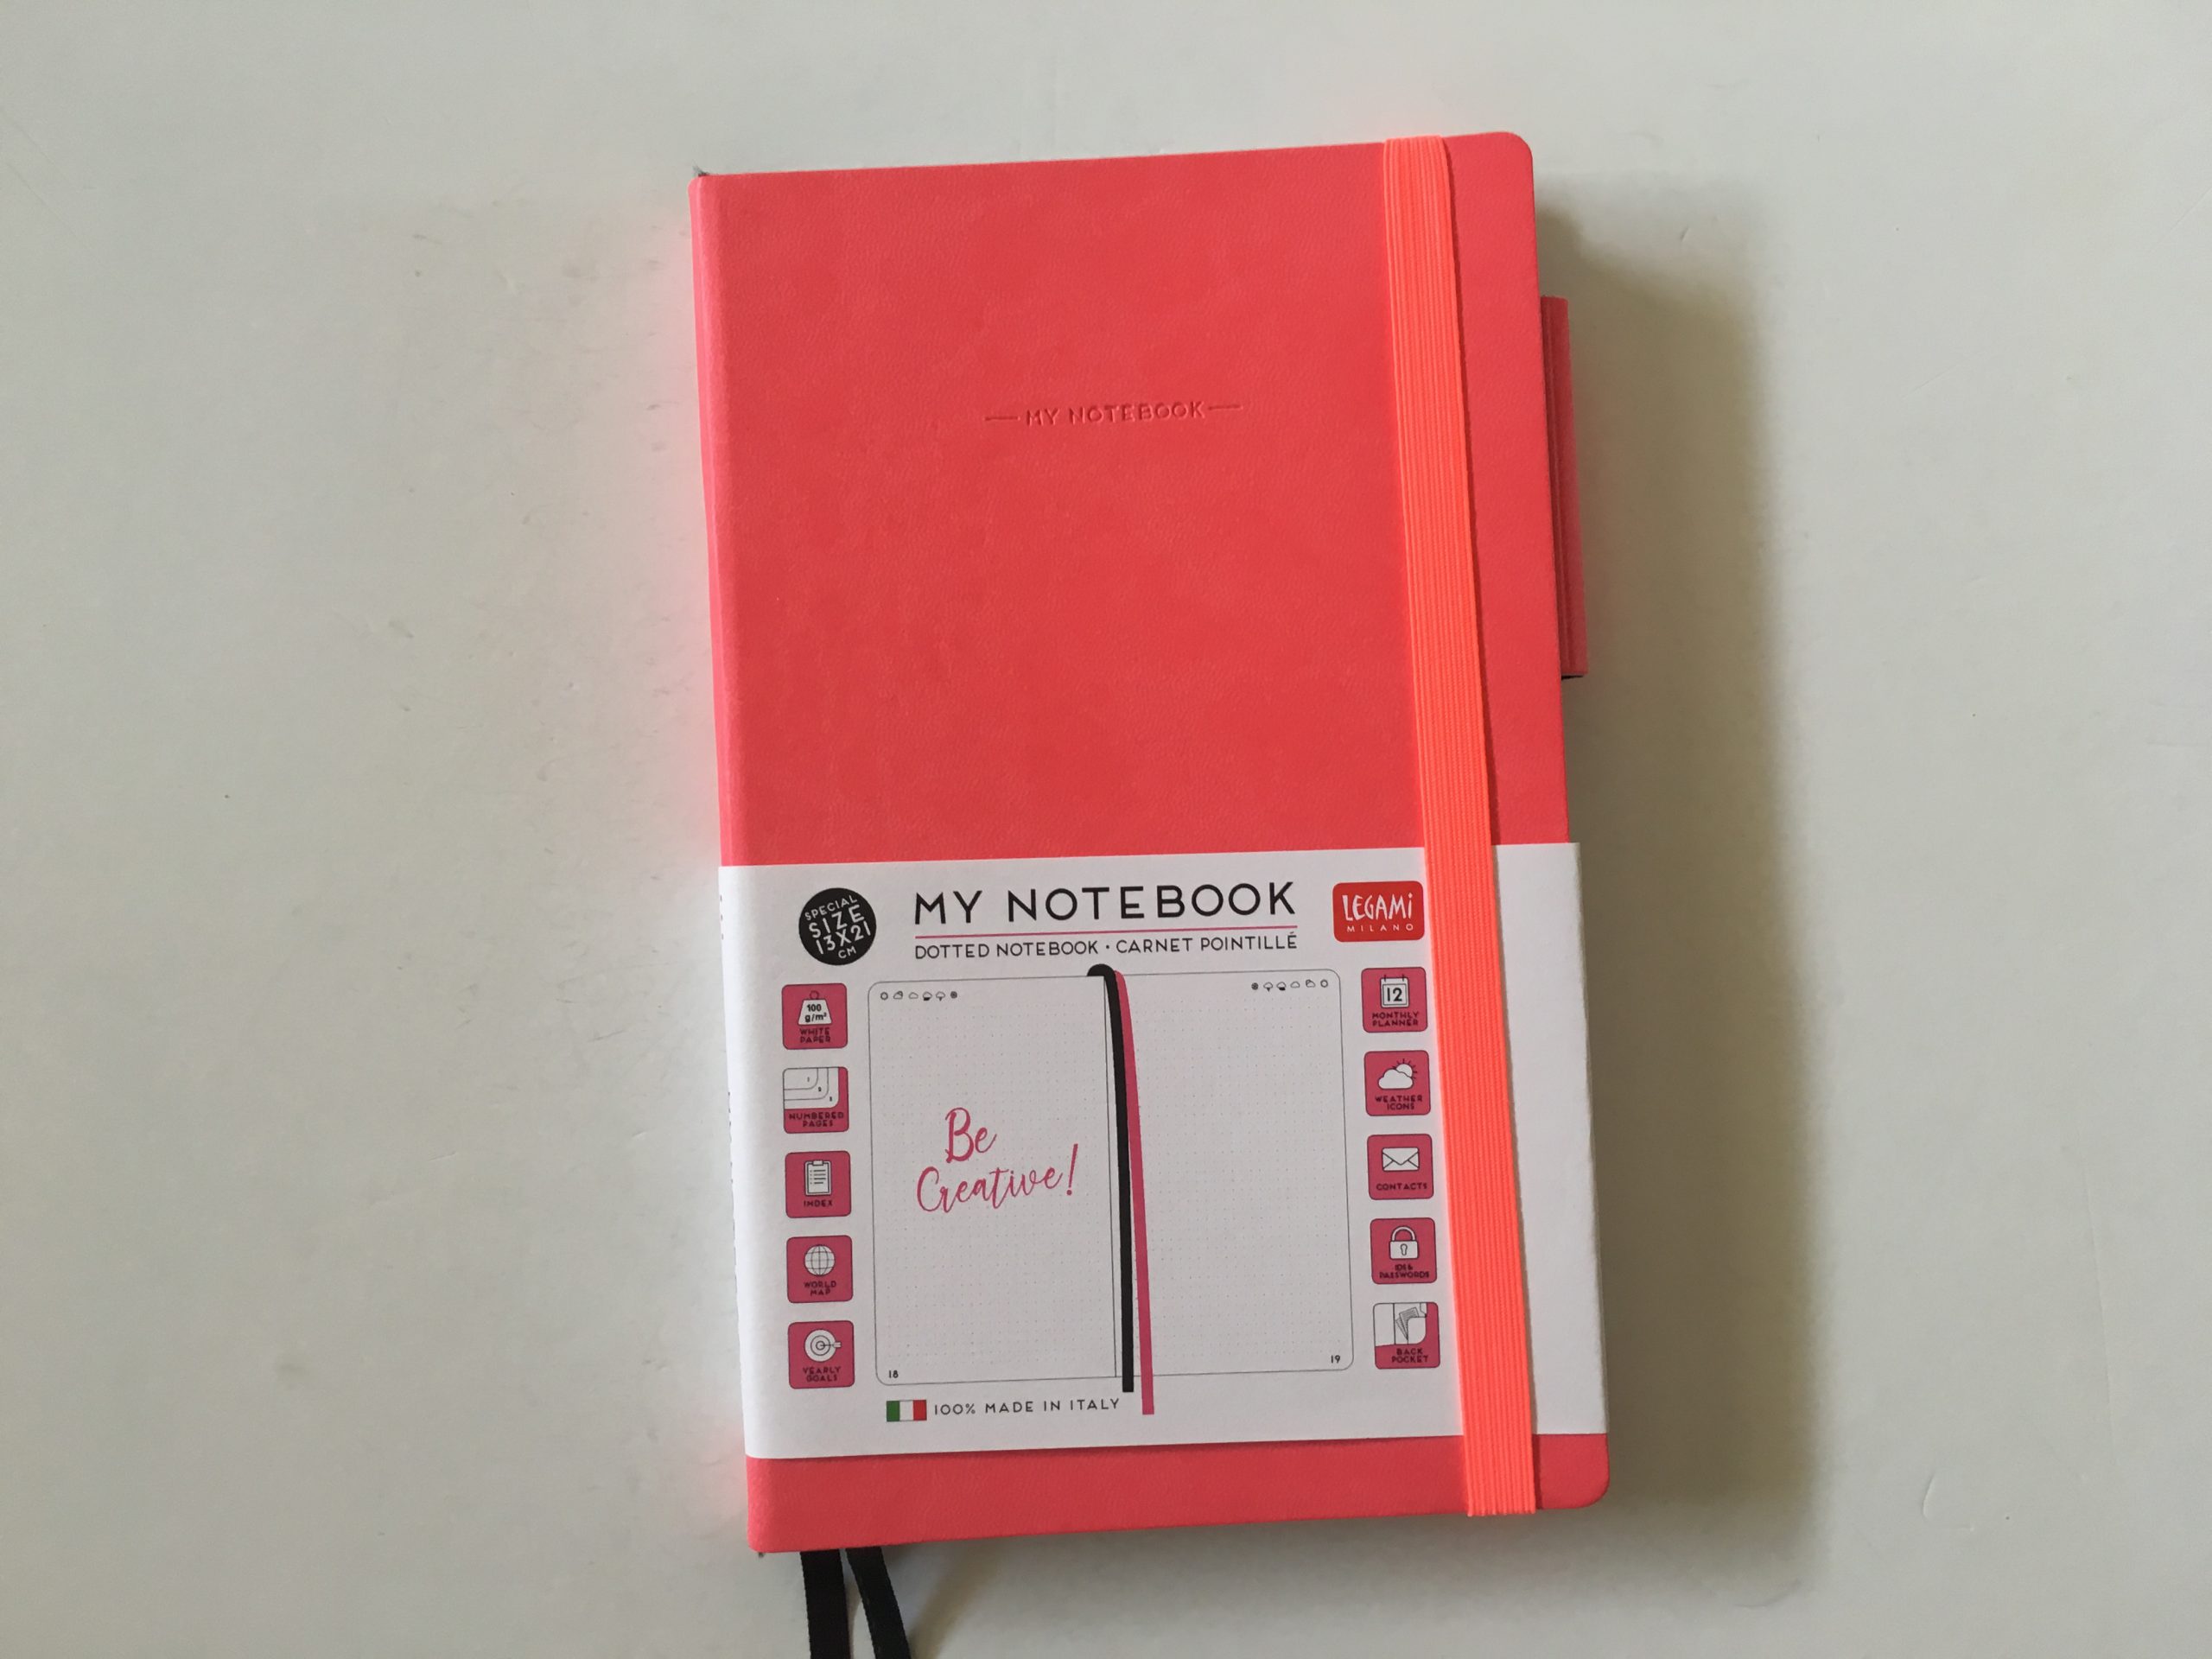 https://allaboutplanners.com.au/wp-content/uploads/2020/03/my-legami-milano-dot-grid-notebook-review-pros-and-cons-bright-white-paper-pen-testing-numbered-pages-index-1-page-monthly-calendar-bullet-journal_01-scaled.jpg